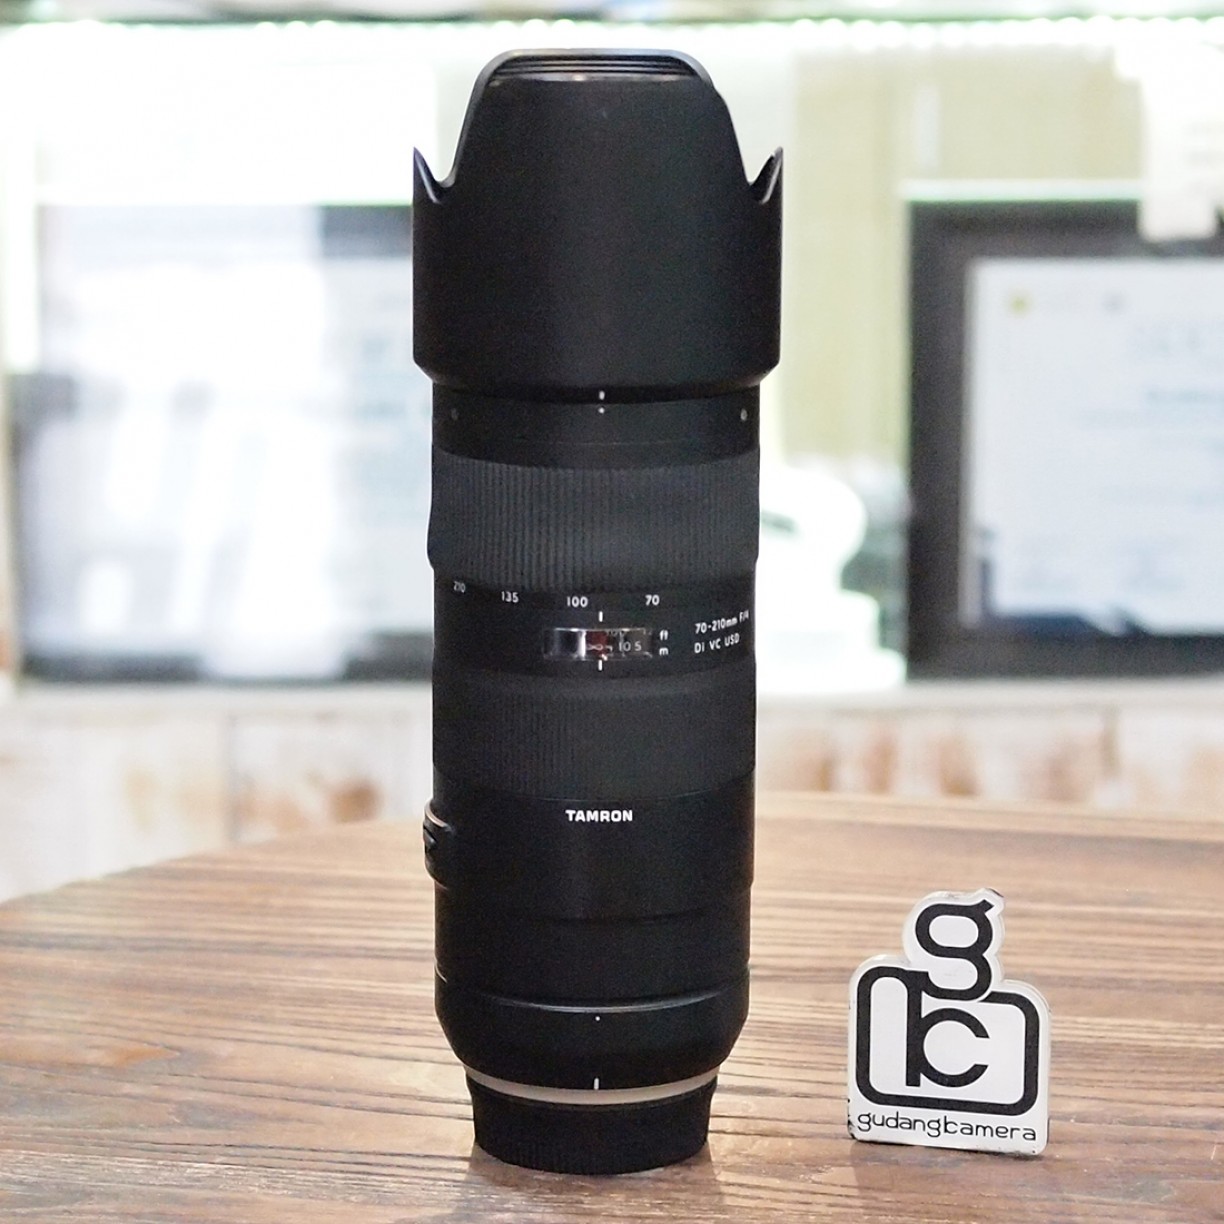 TAMRON AF 70-210mm F4 F 4 DI VC USD FOR NIKON - GOOD CONDITION - 8900